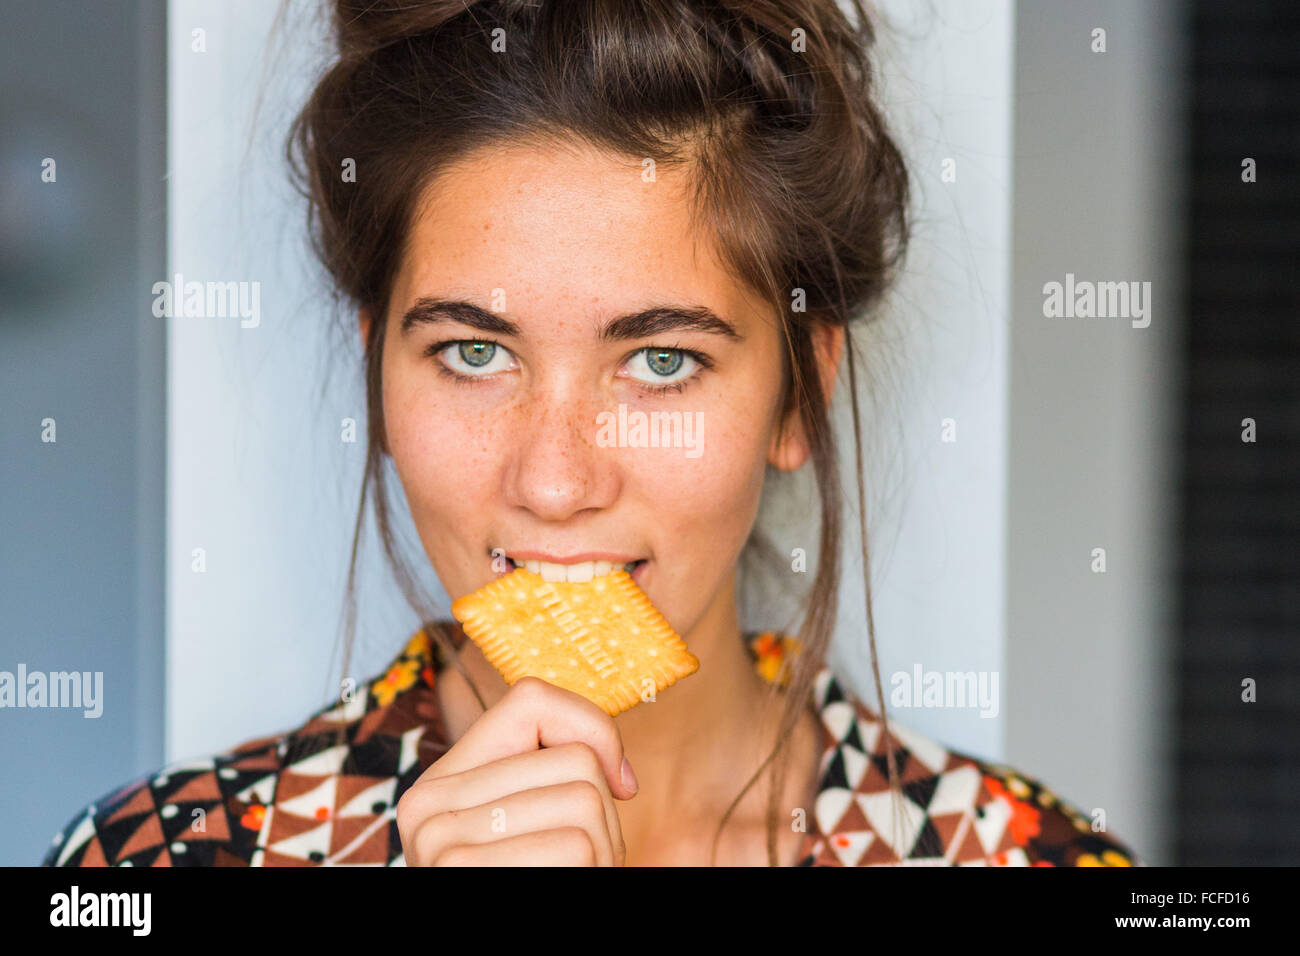 Woman eating cookies. Banque D'Images